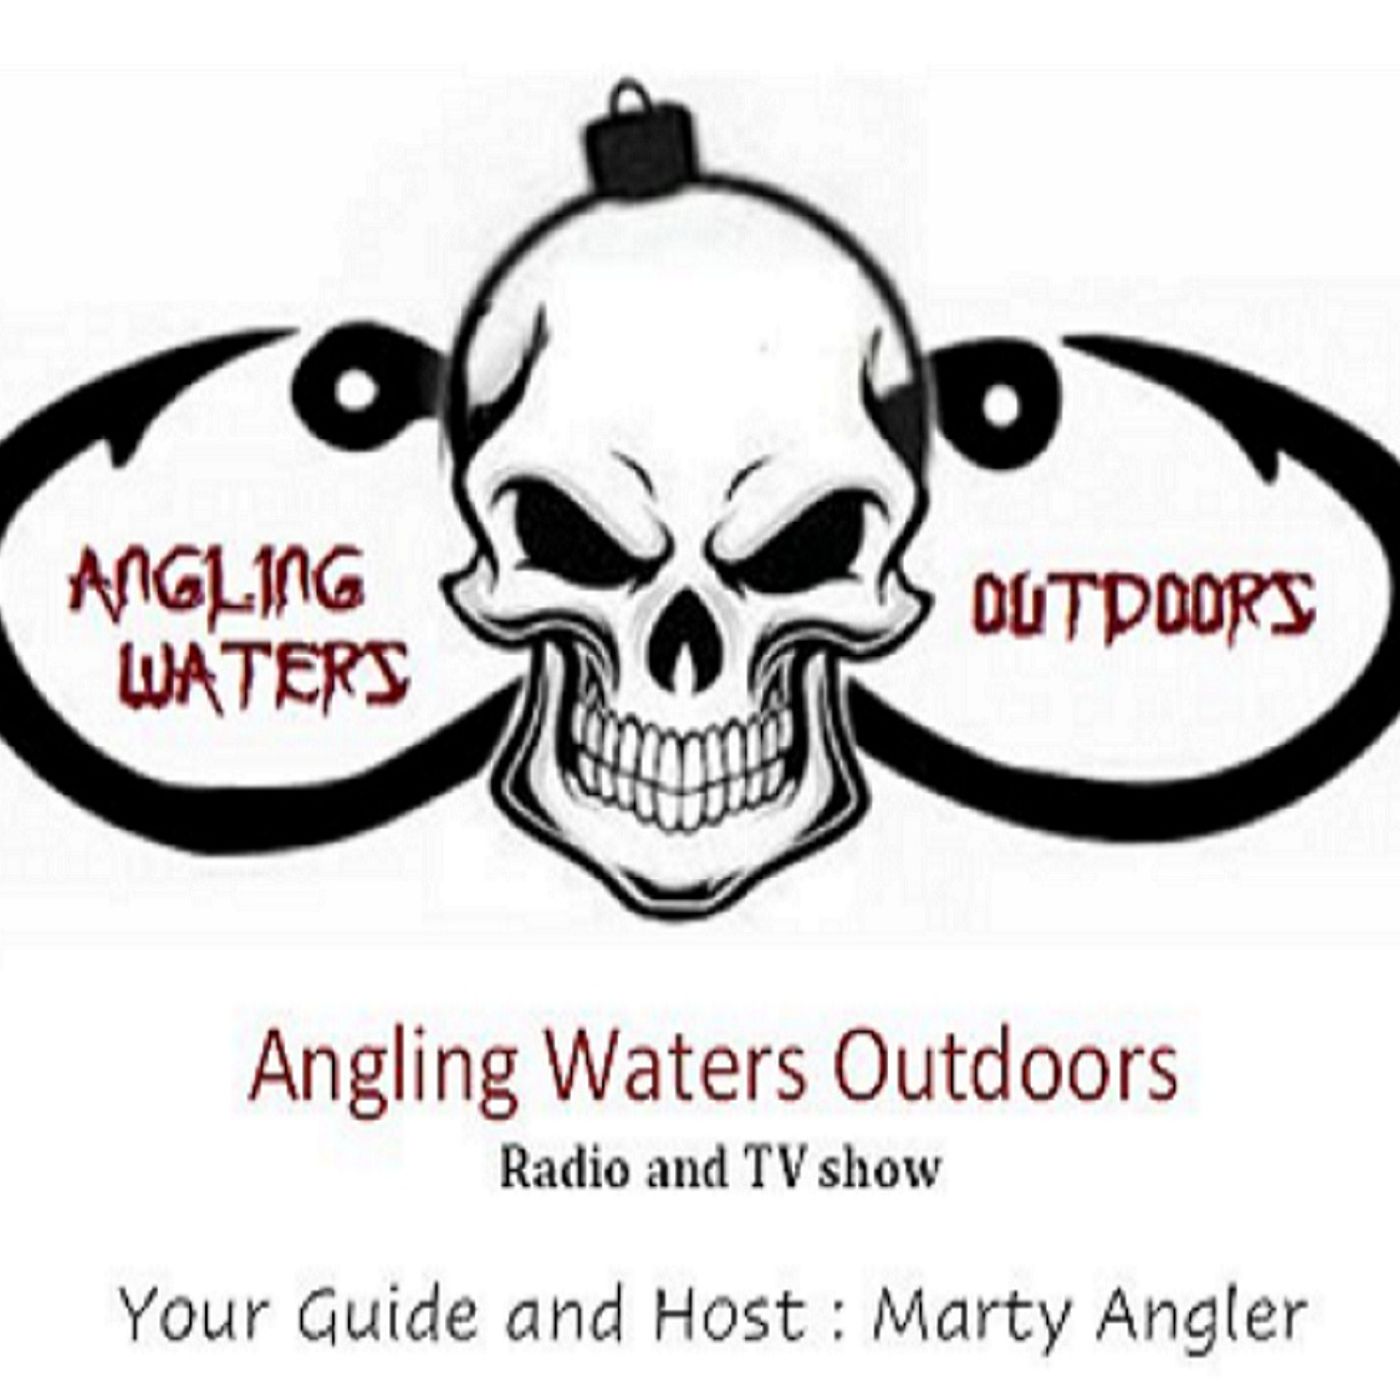 Angling Waters Outdoors show 1-2-21 WHIW 101.3fM